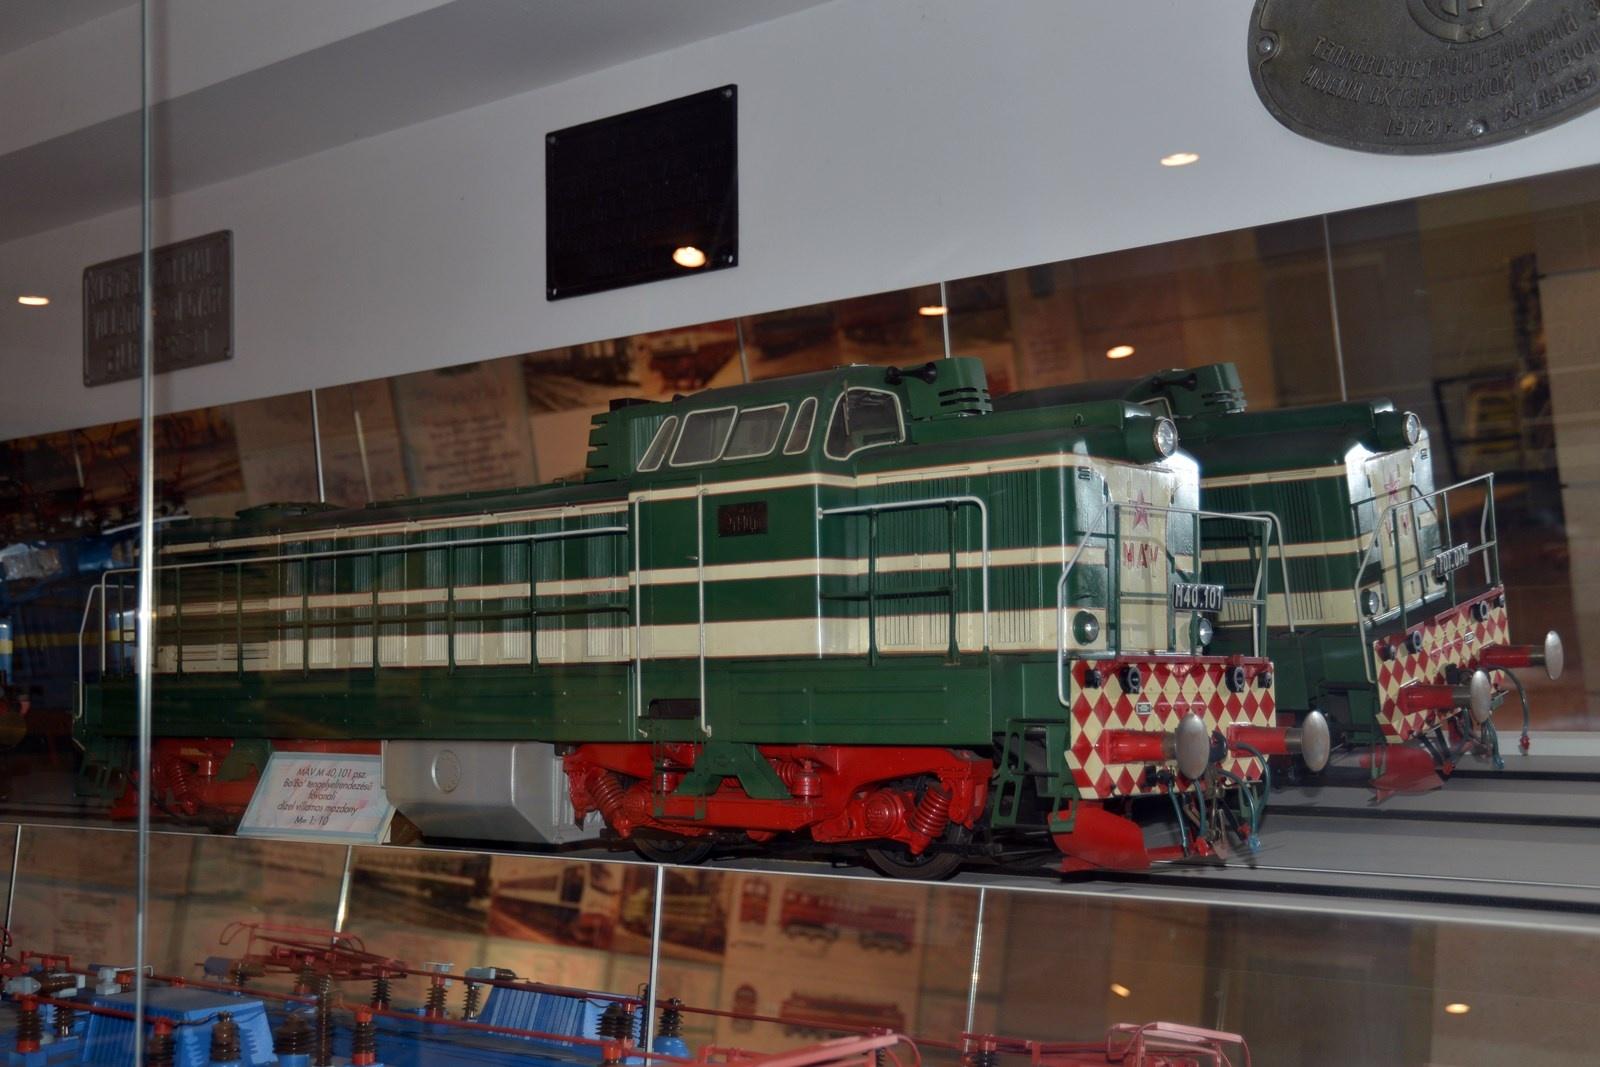 Budapest Transport Museum Objects On Show At House Of European History In Brussels